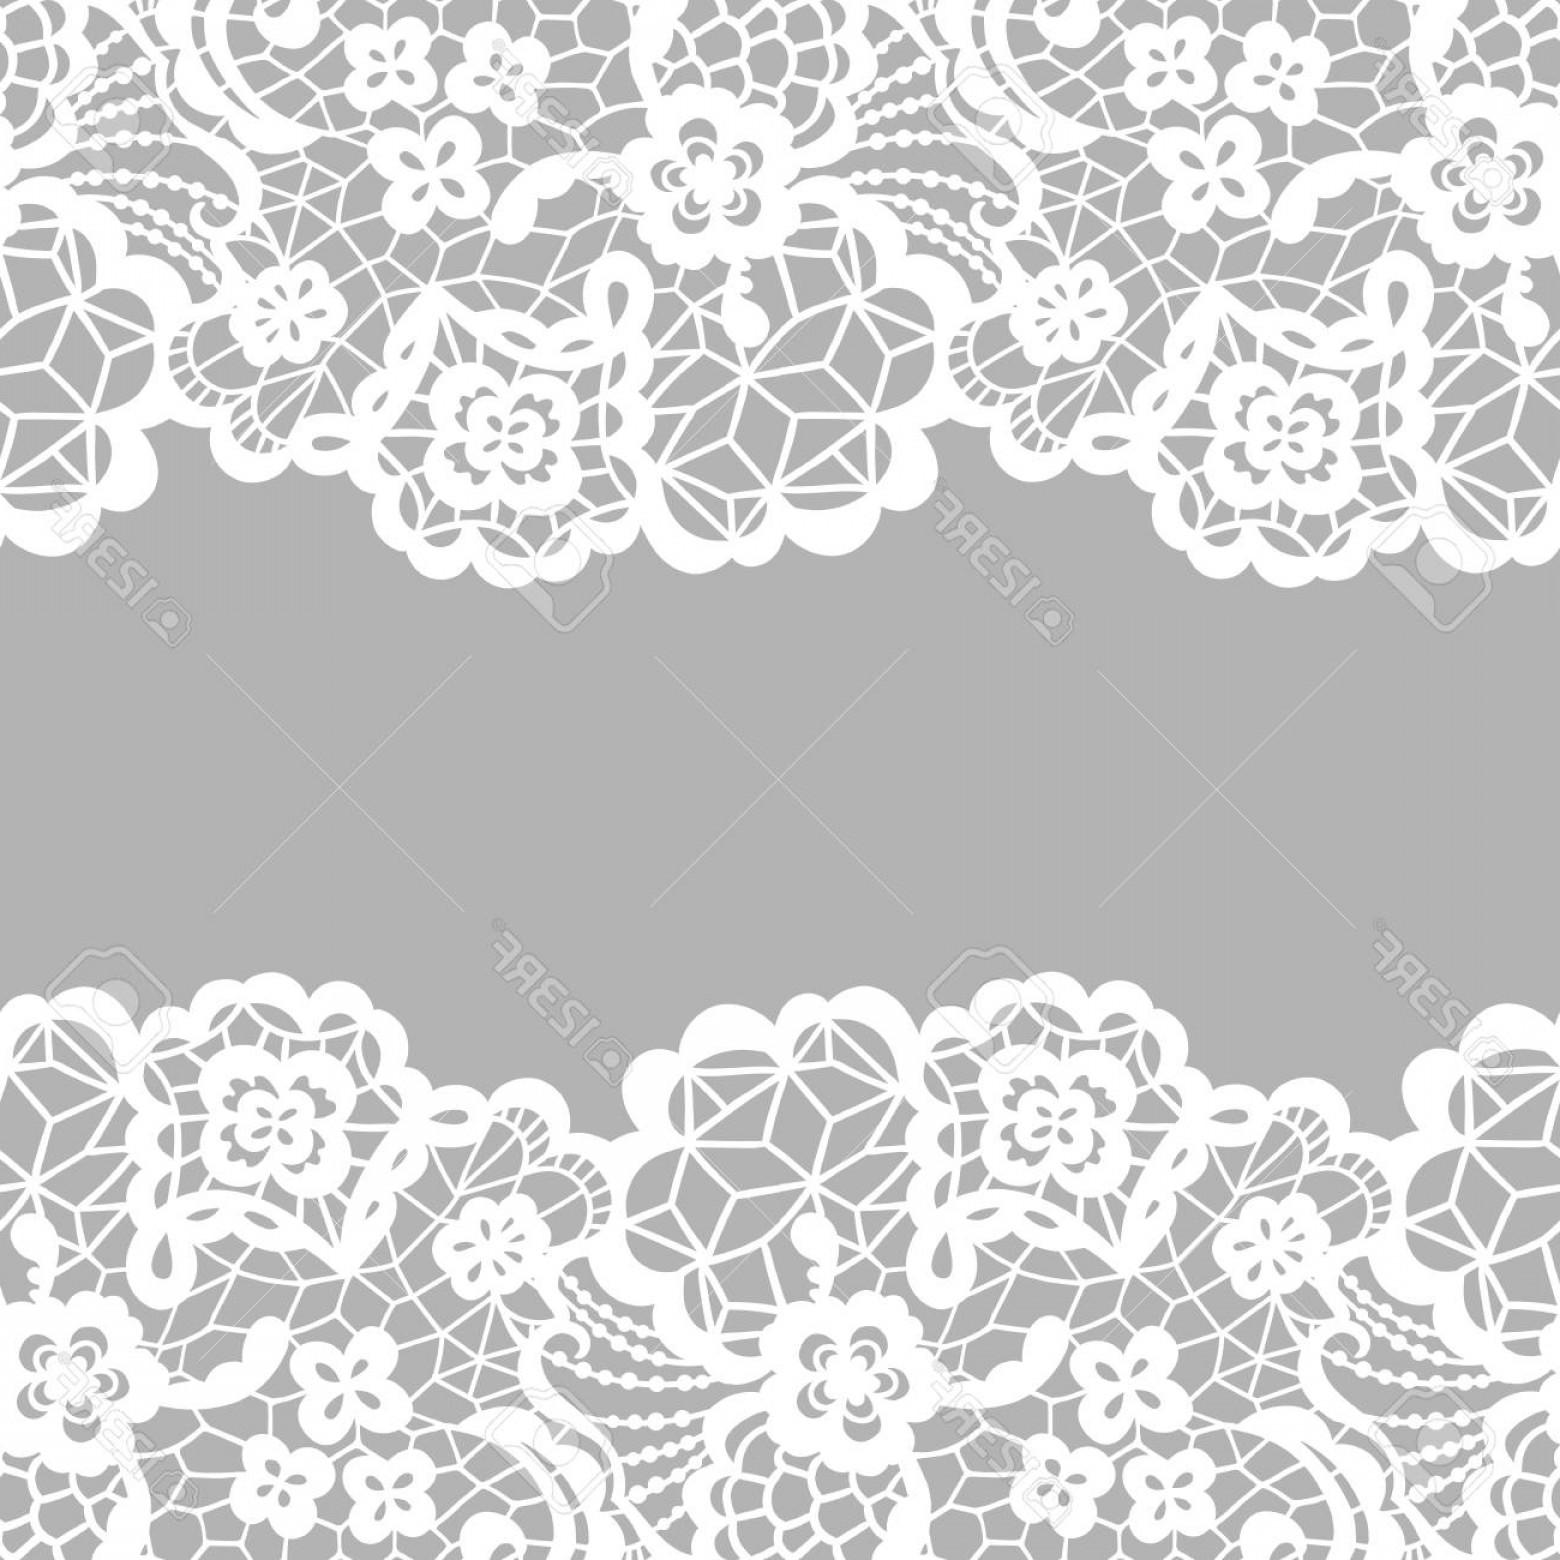 Download White Lace Border Vector at Vectorified.com | Collection ...